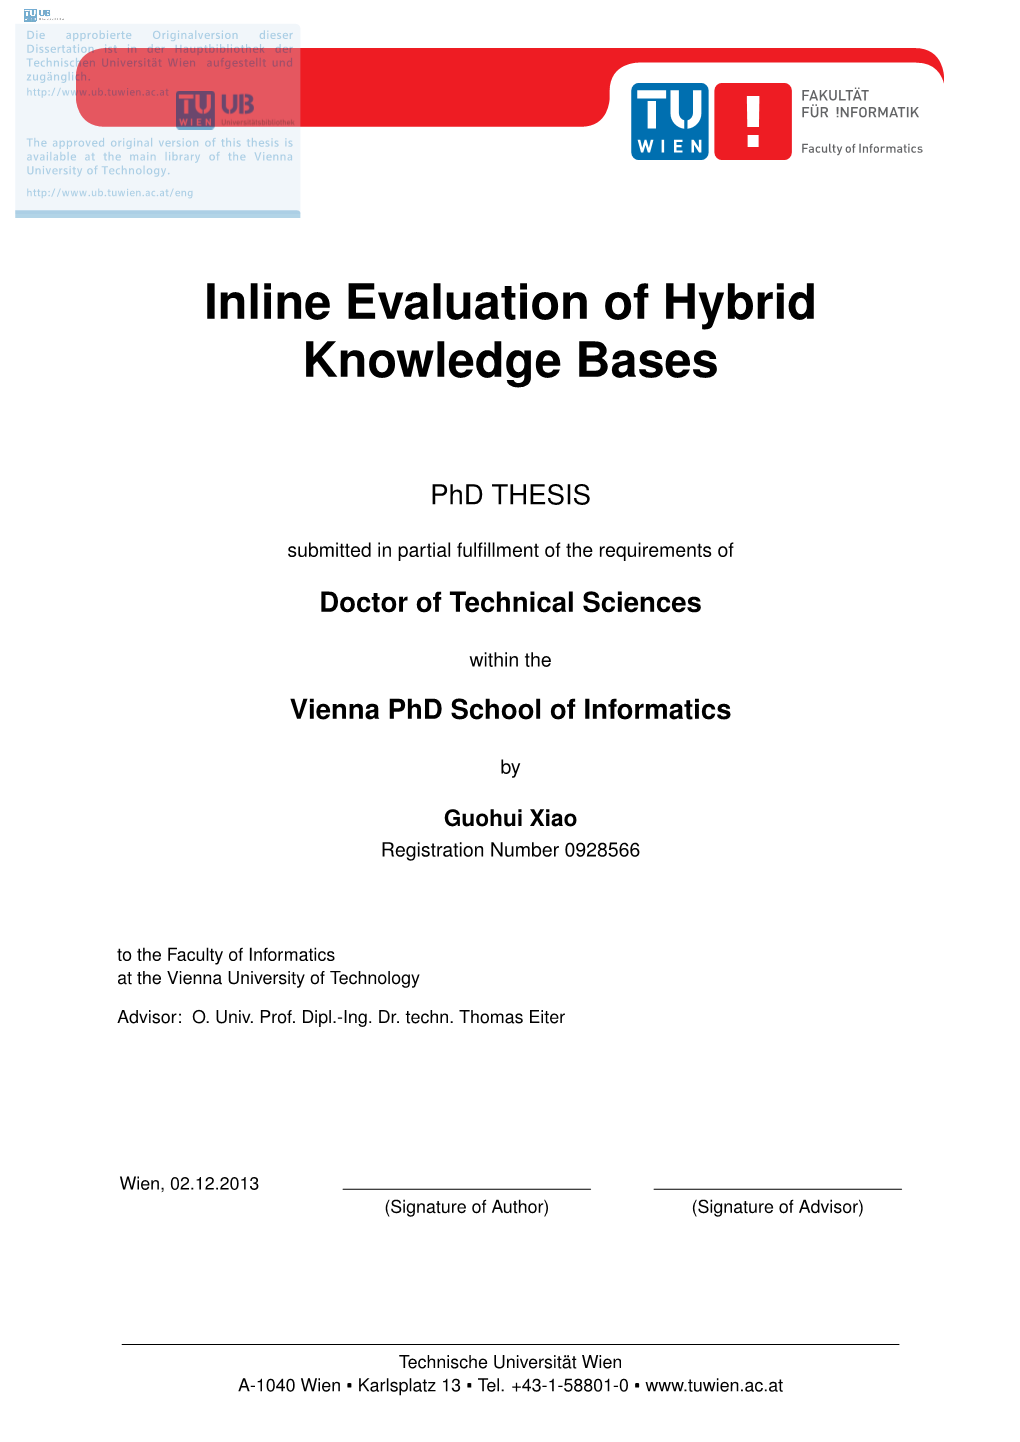 Inline Evaluation of Hybrid Knowledge Bases